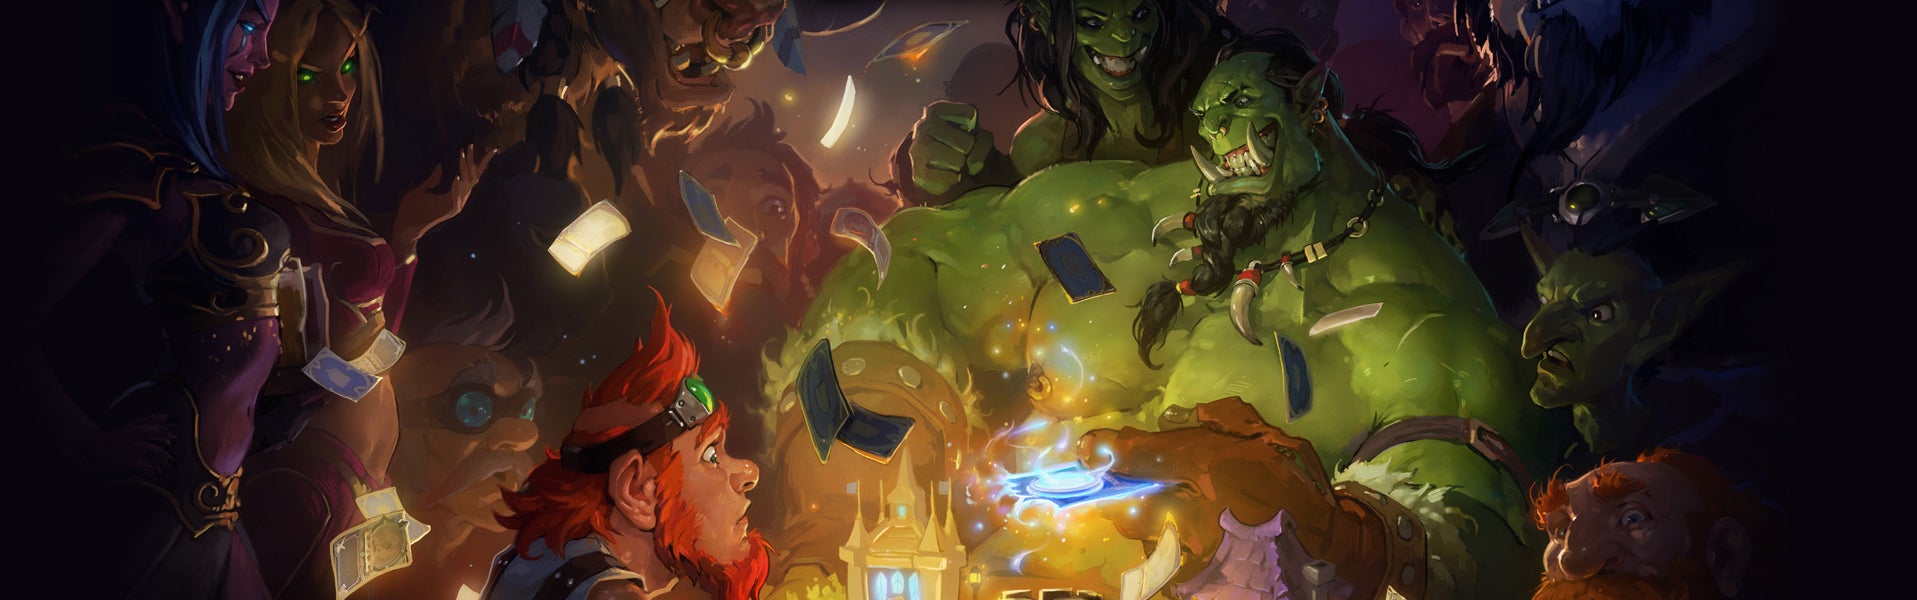 Image for Hearthstone Tips and Strategies: Beginner's Glossary, Guide to Terms, Deck Types